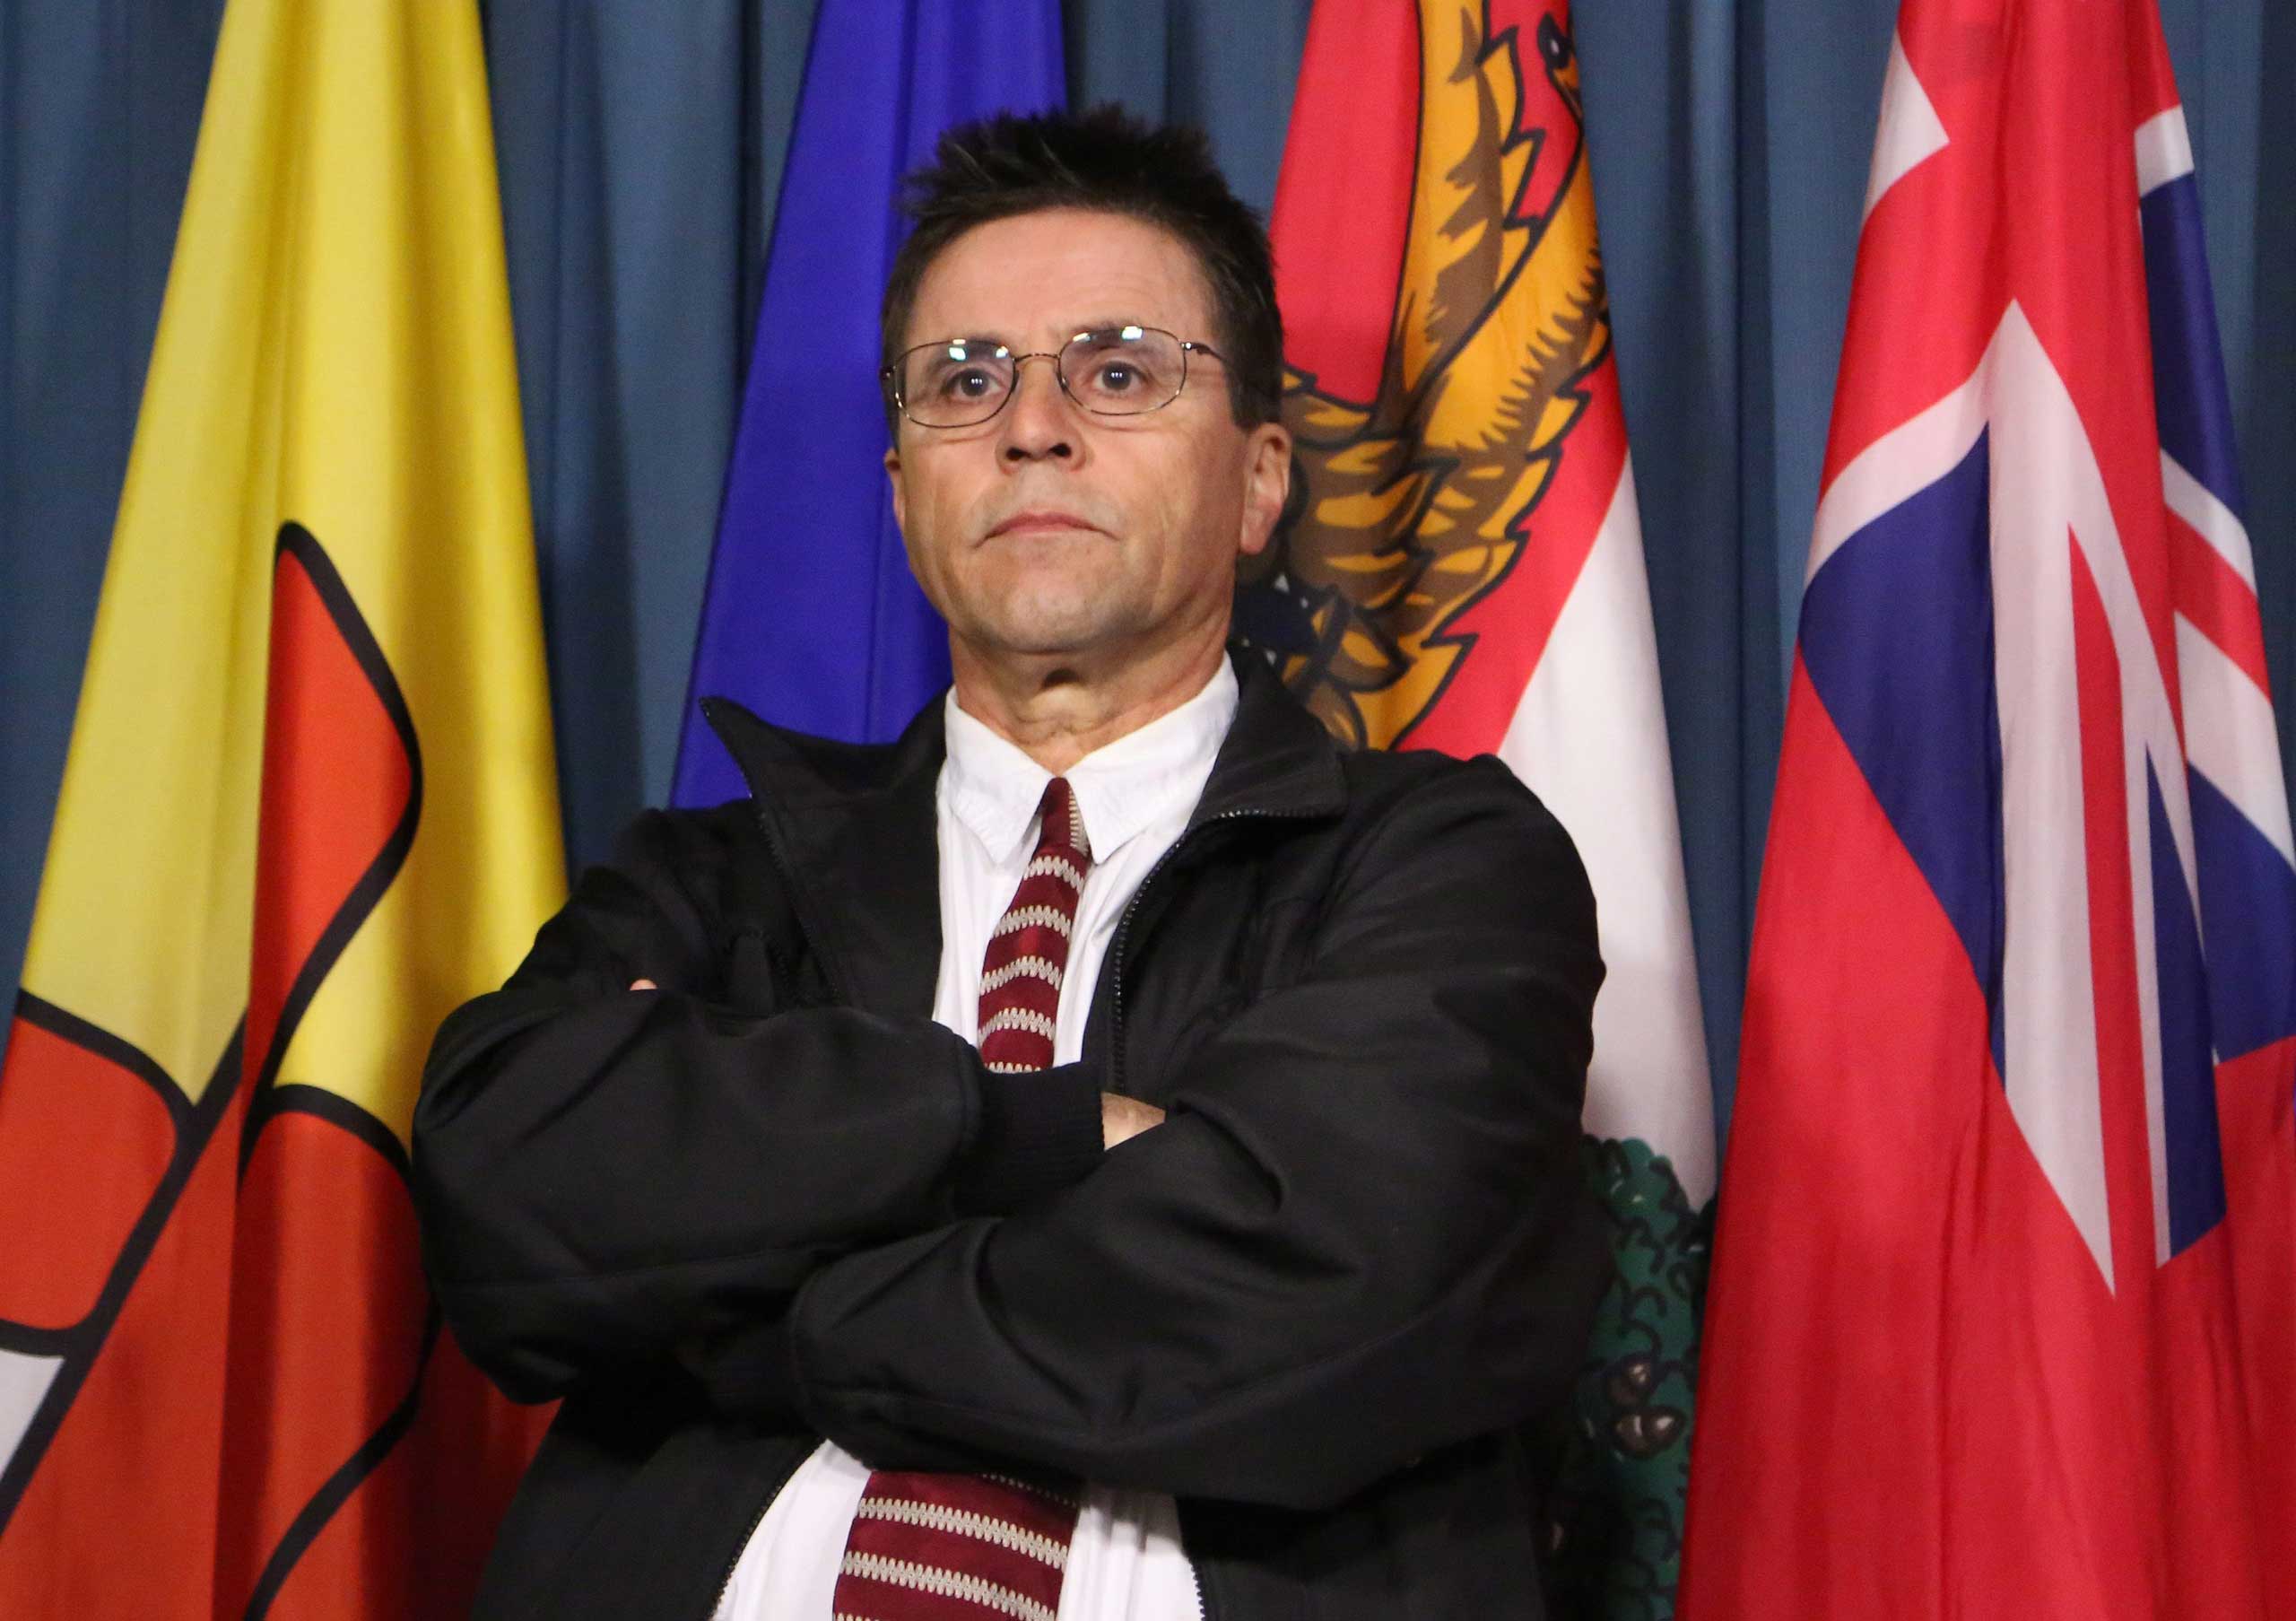 Hassan Diab, the Ottawa professor who has been ordered extradited to France by the Canadian government, listens to his lawyer speak at a press conference on Parliament Hill in Ottawa, April 13, 2012. (Patrick Doyle—AP)